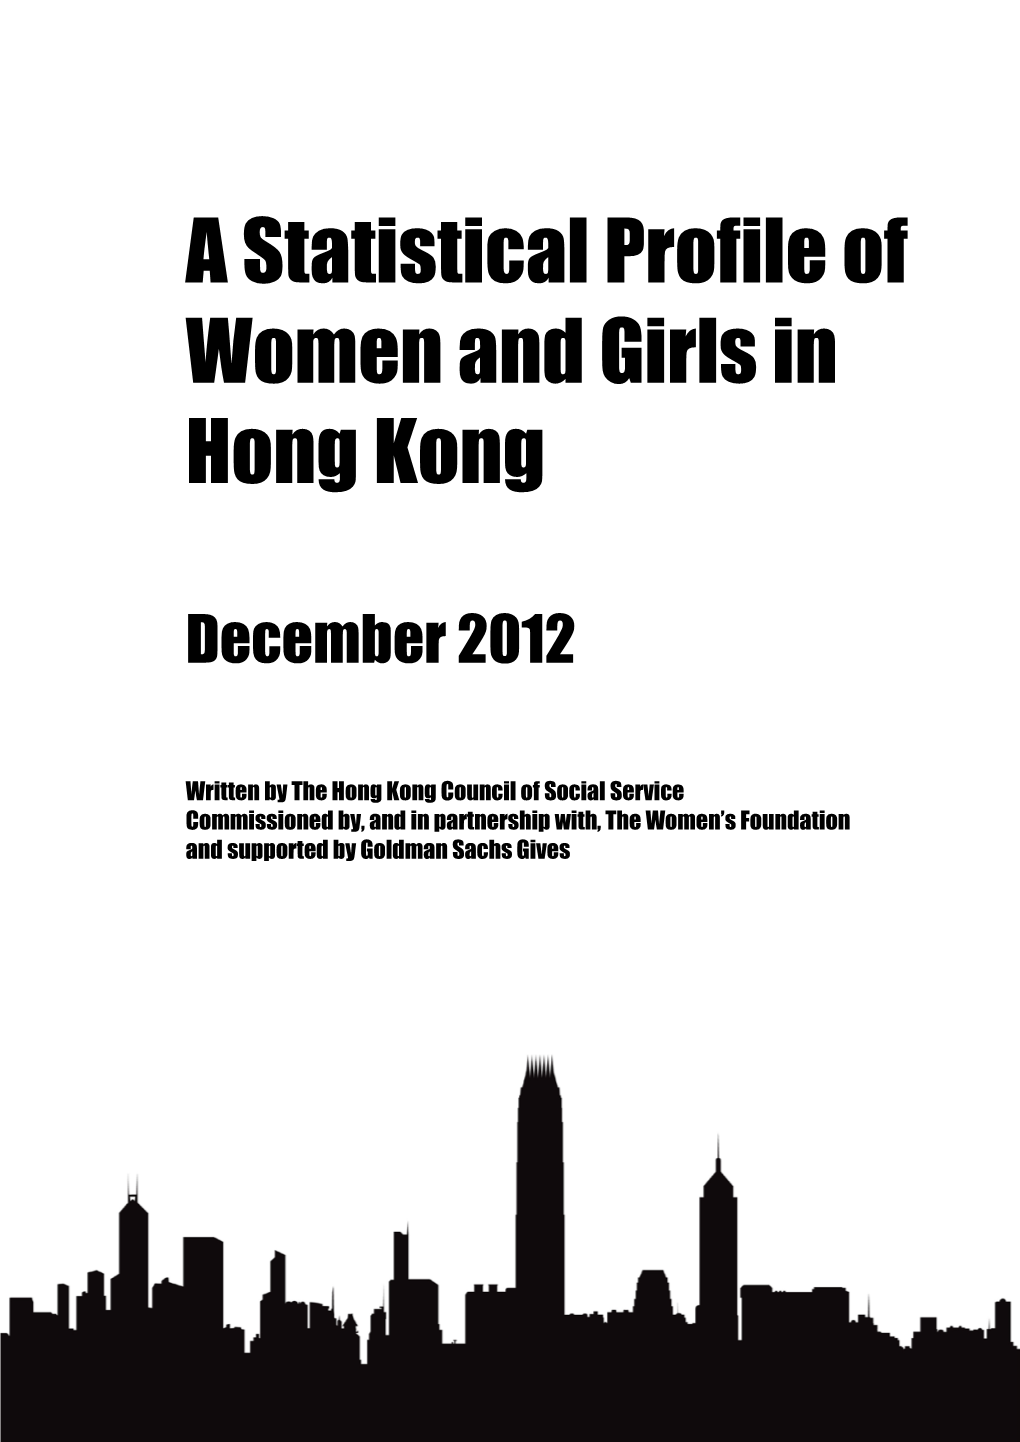 A Statistical Profile of Women and Girls in Hong Kong